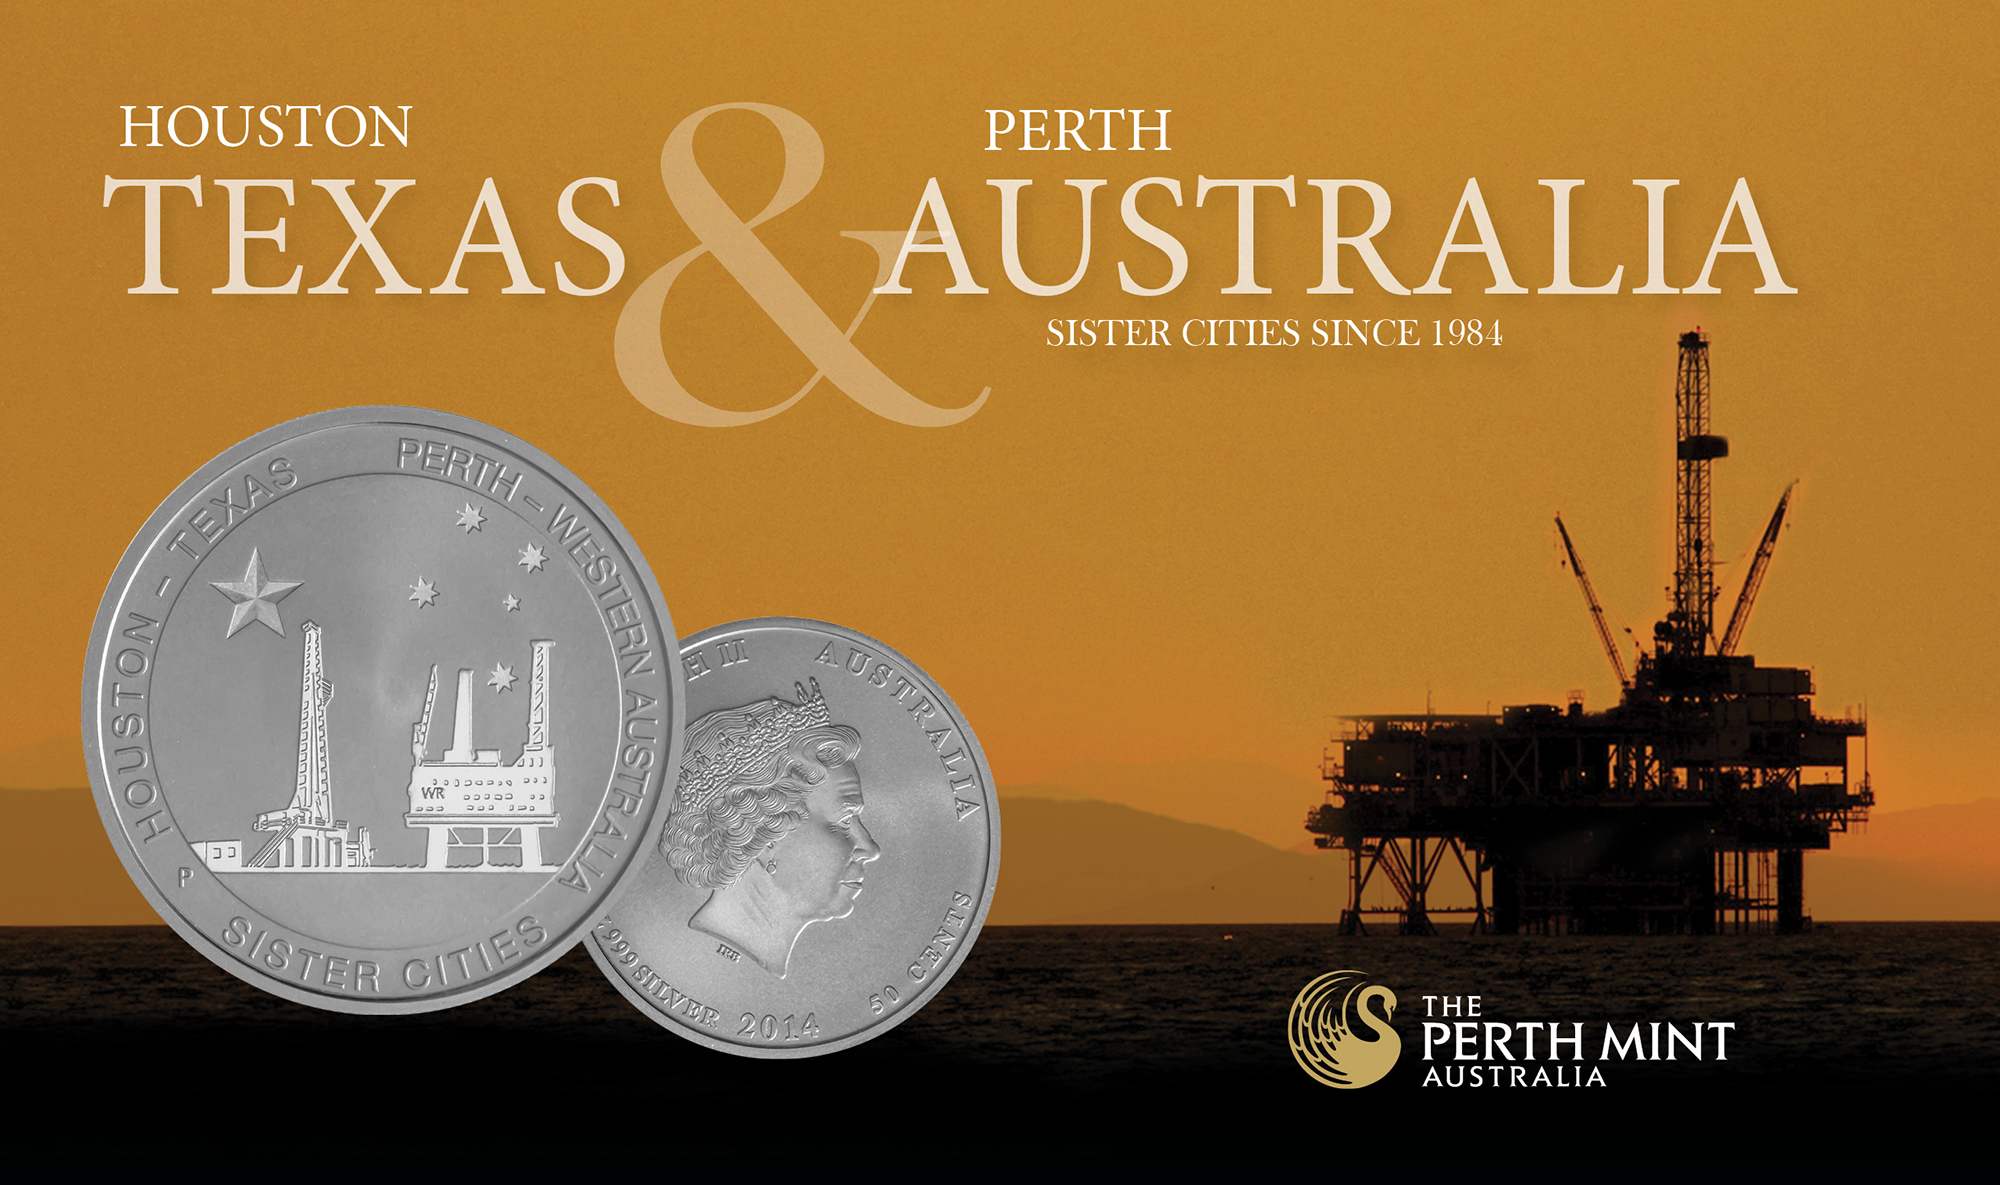 Texas Precious Metals and The Perth Mint, Australia Partner on Energy-themed, Limited Edition ½ oz Silver Coin